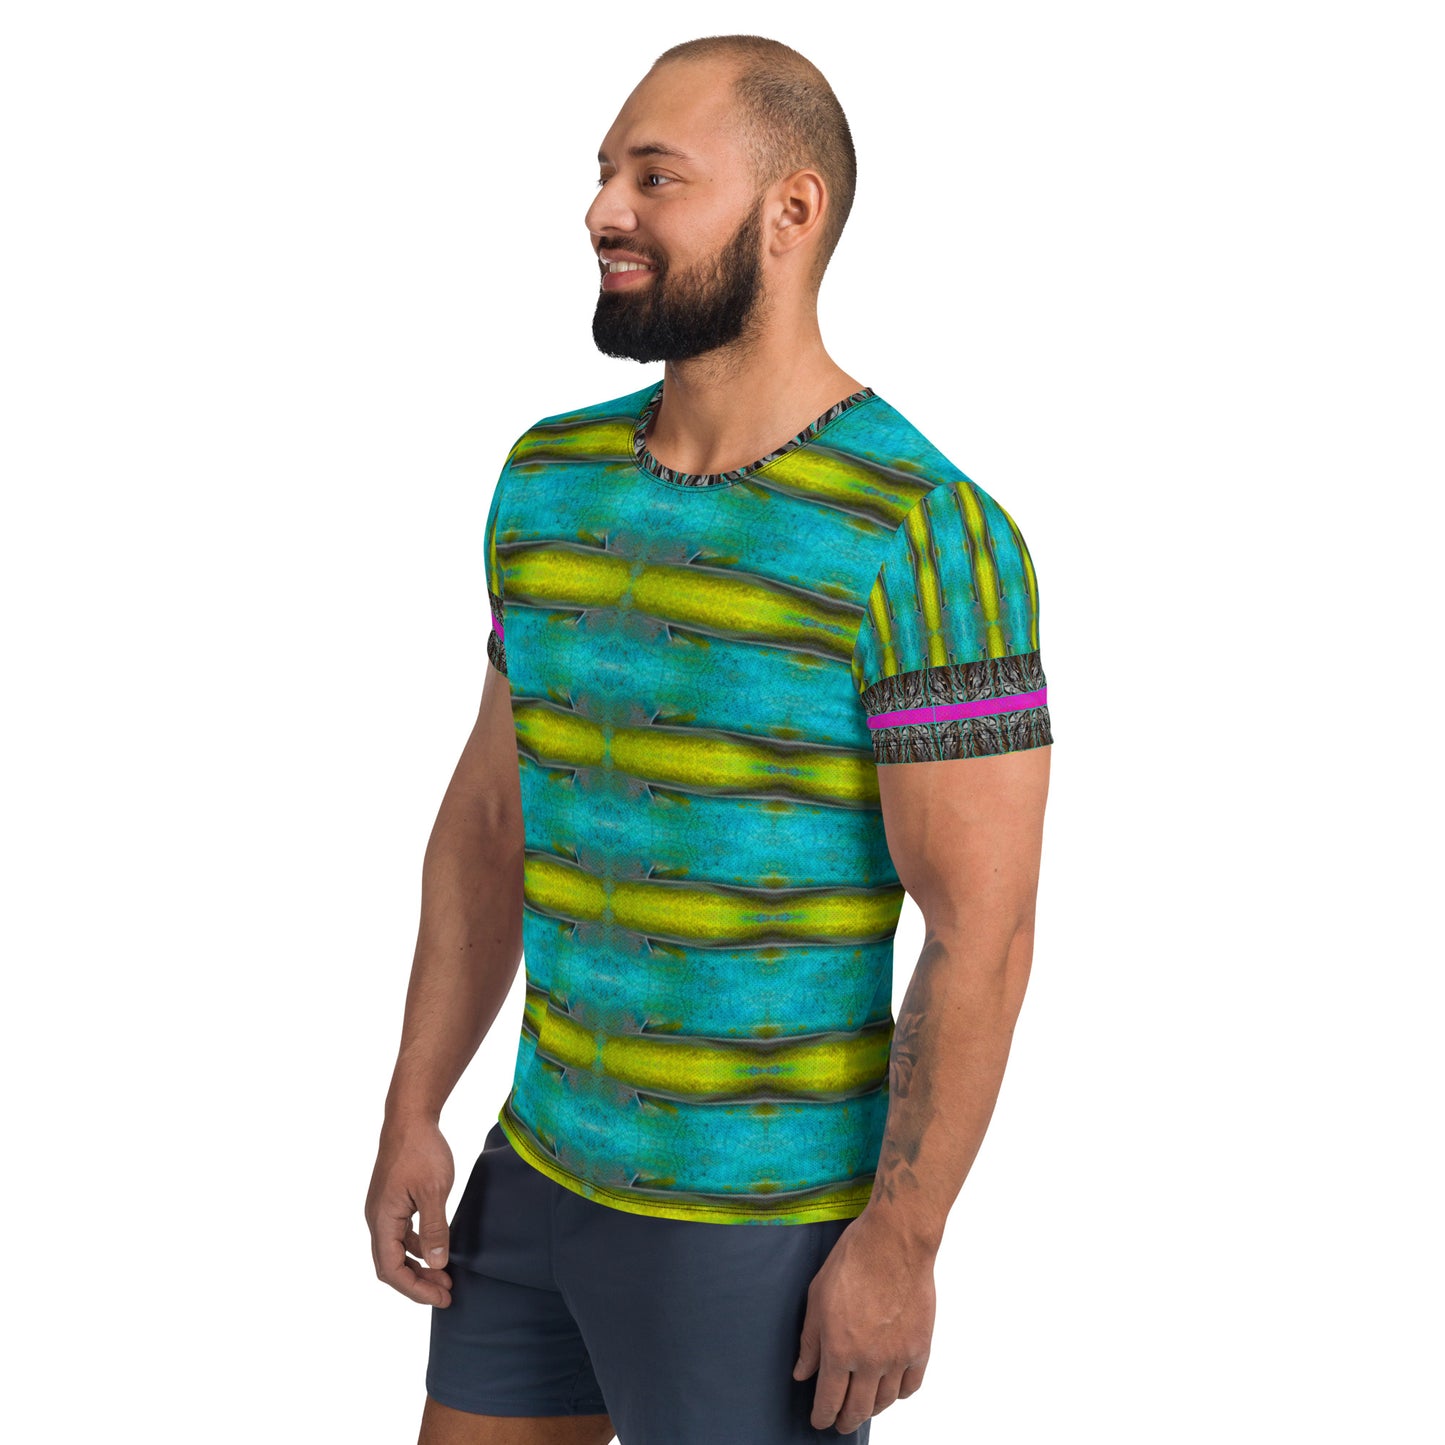 Athletic T-shirt (His/They)(Tree Link Stripe) RJSTH@Fabric#8 RJSTHS2021 RJS